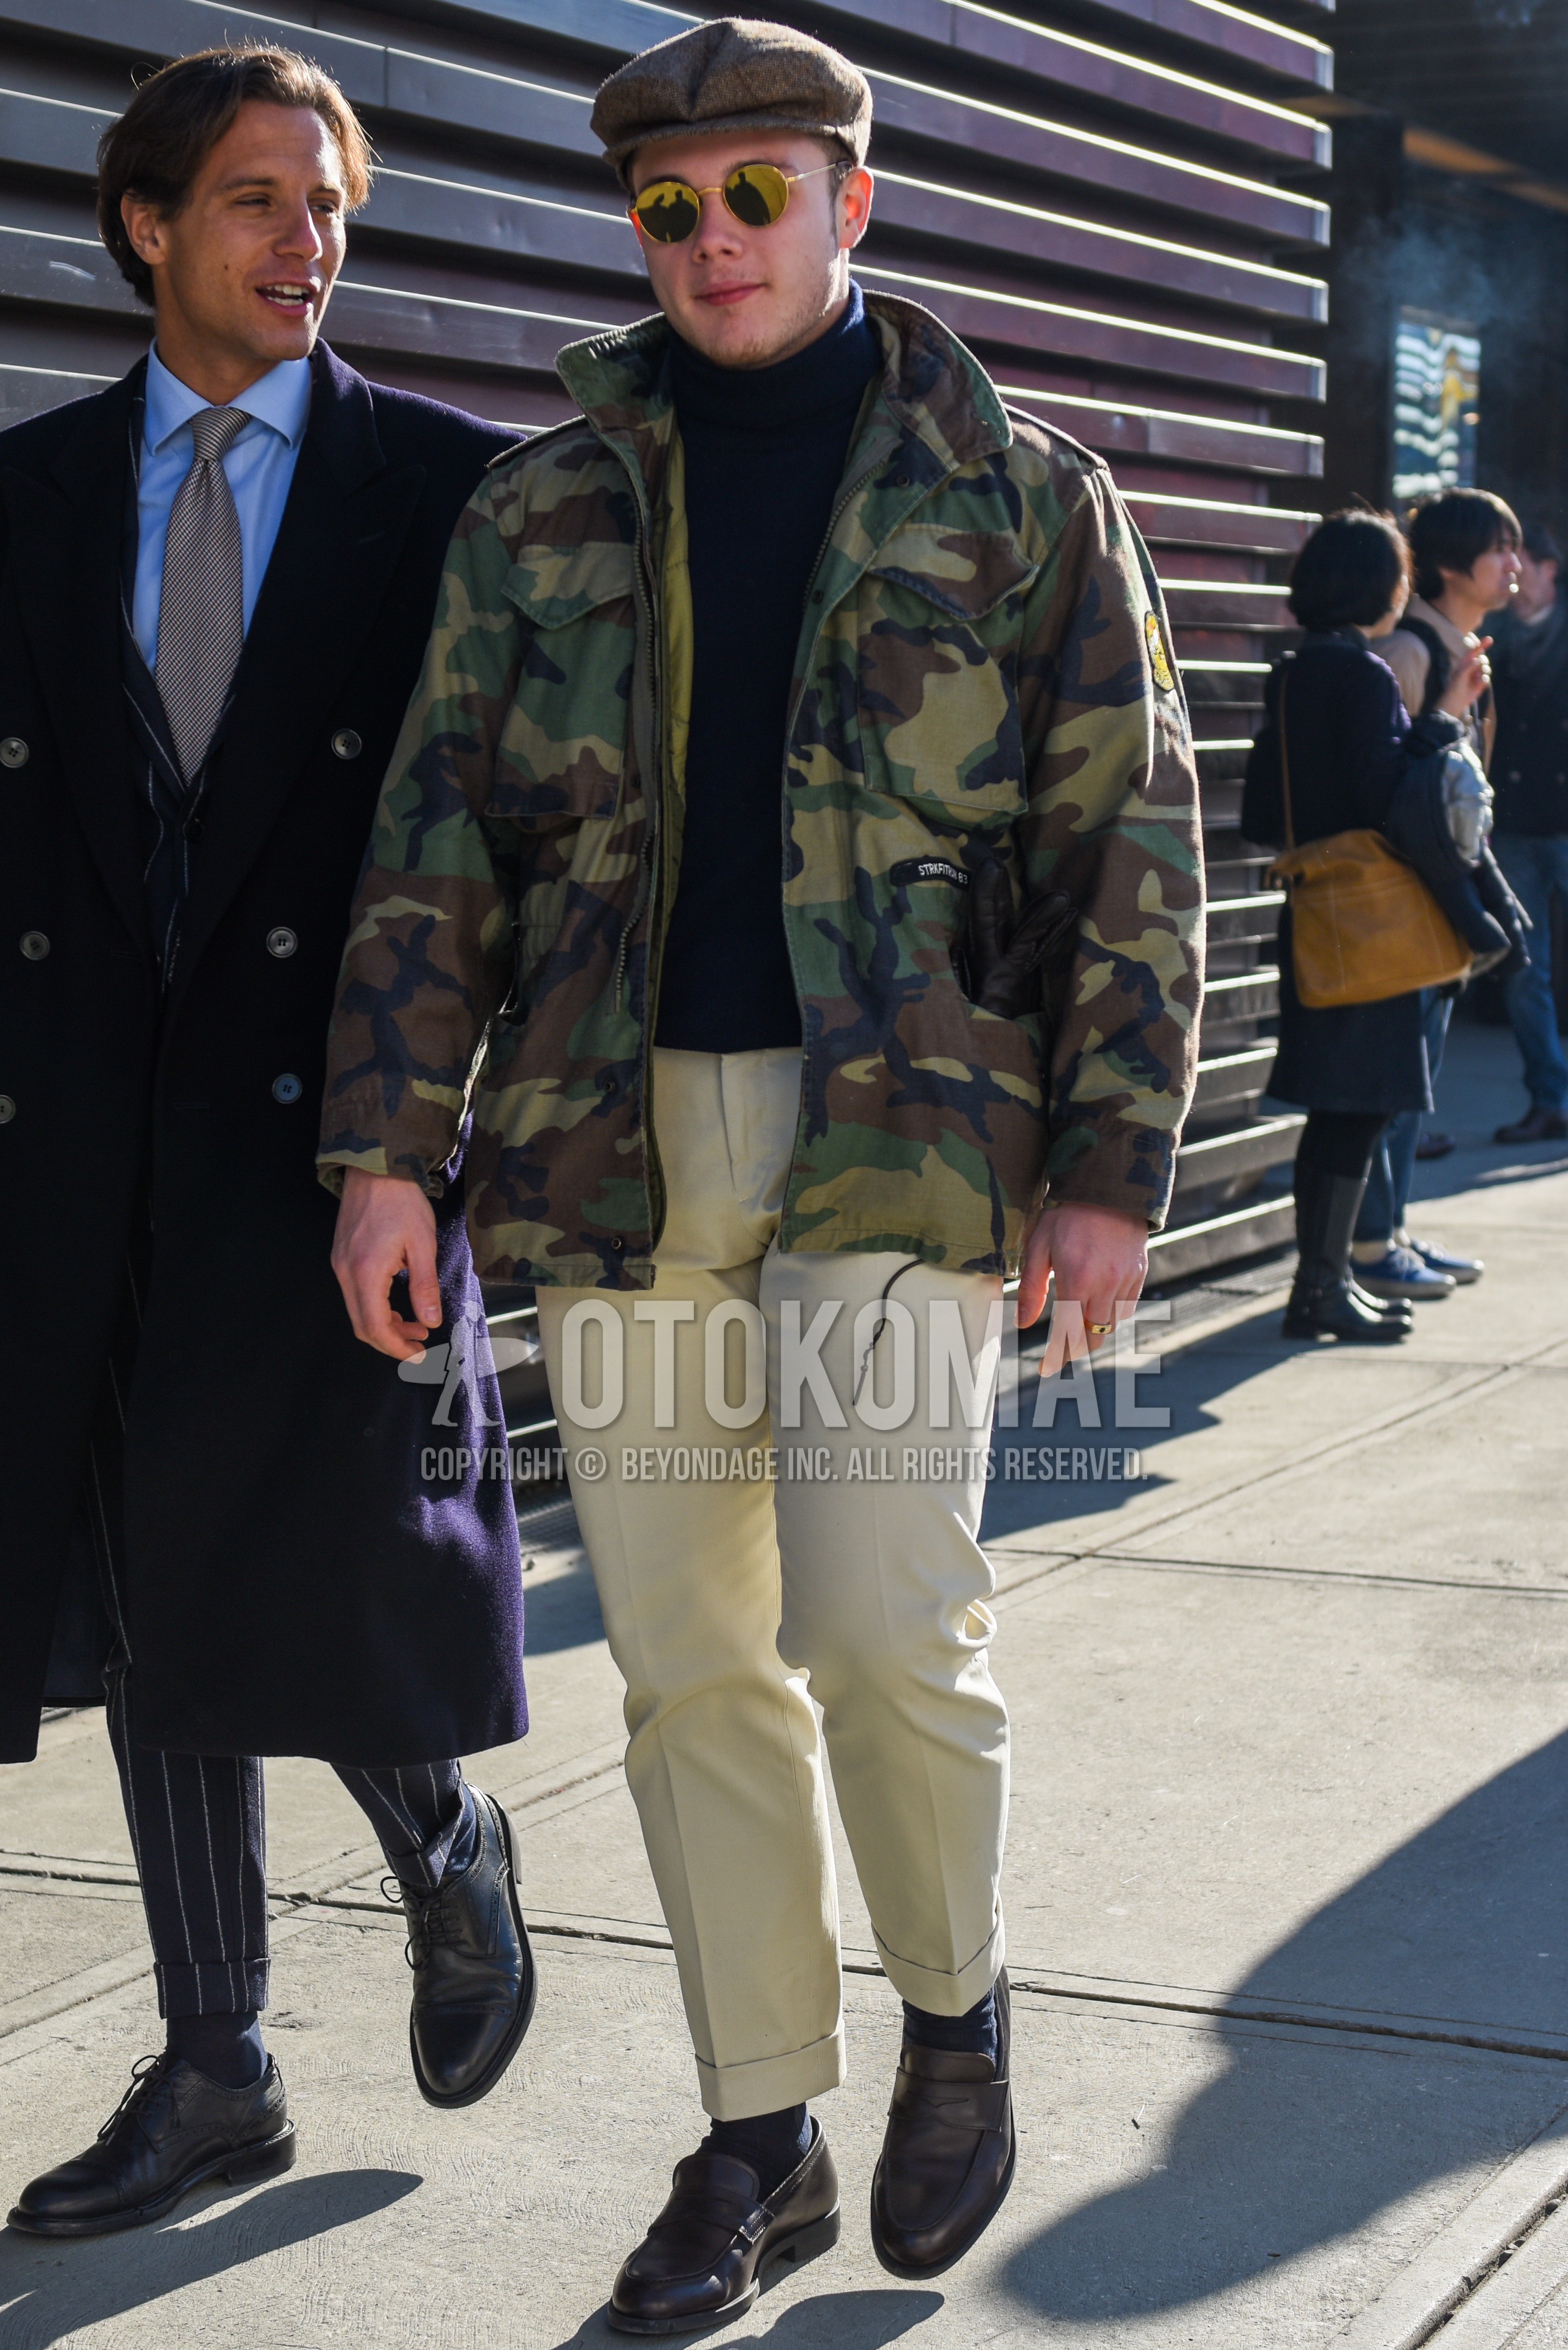 Men's autumn winter outfit with gray plain hunting cap, gold plain sunglasses, olive green camouflage M-65, navy plain turtleneck knit, white beige plain slacks, navy plain socks, brown coin loafers leather shoes.